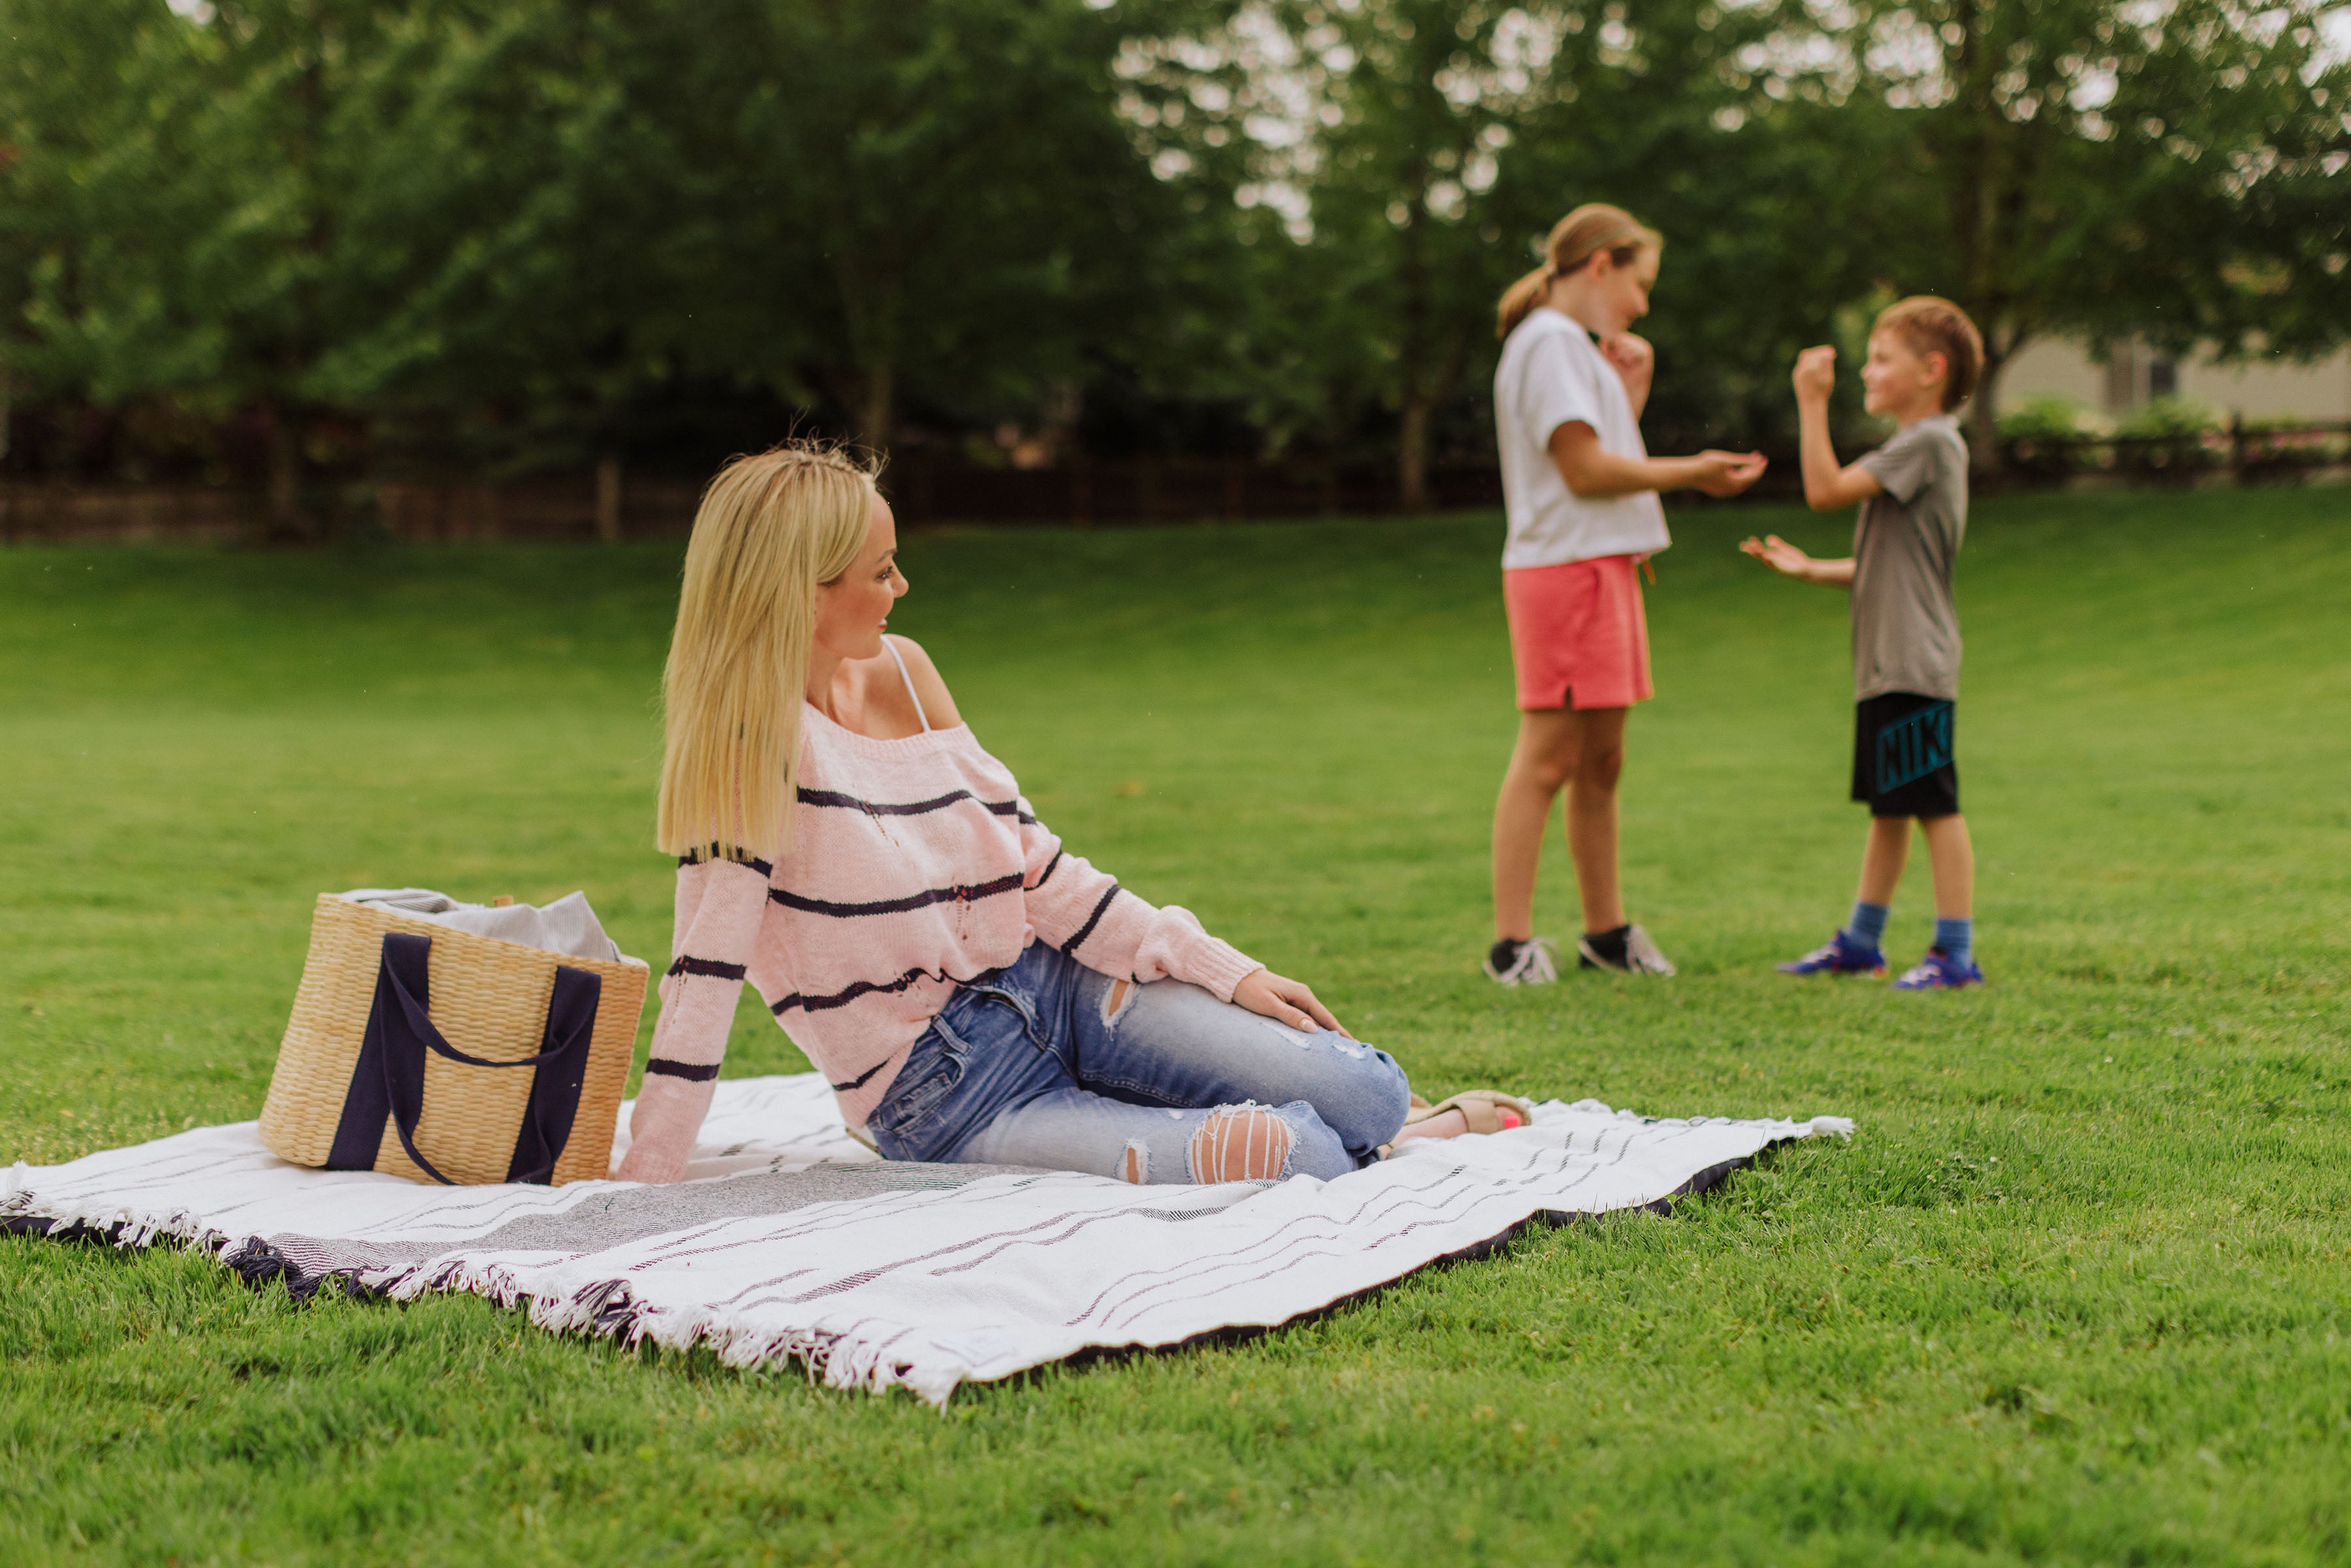 Montecito Picnic Blanket with Harness